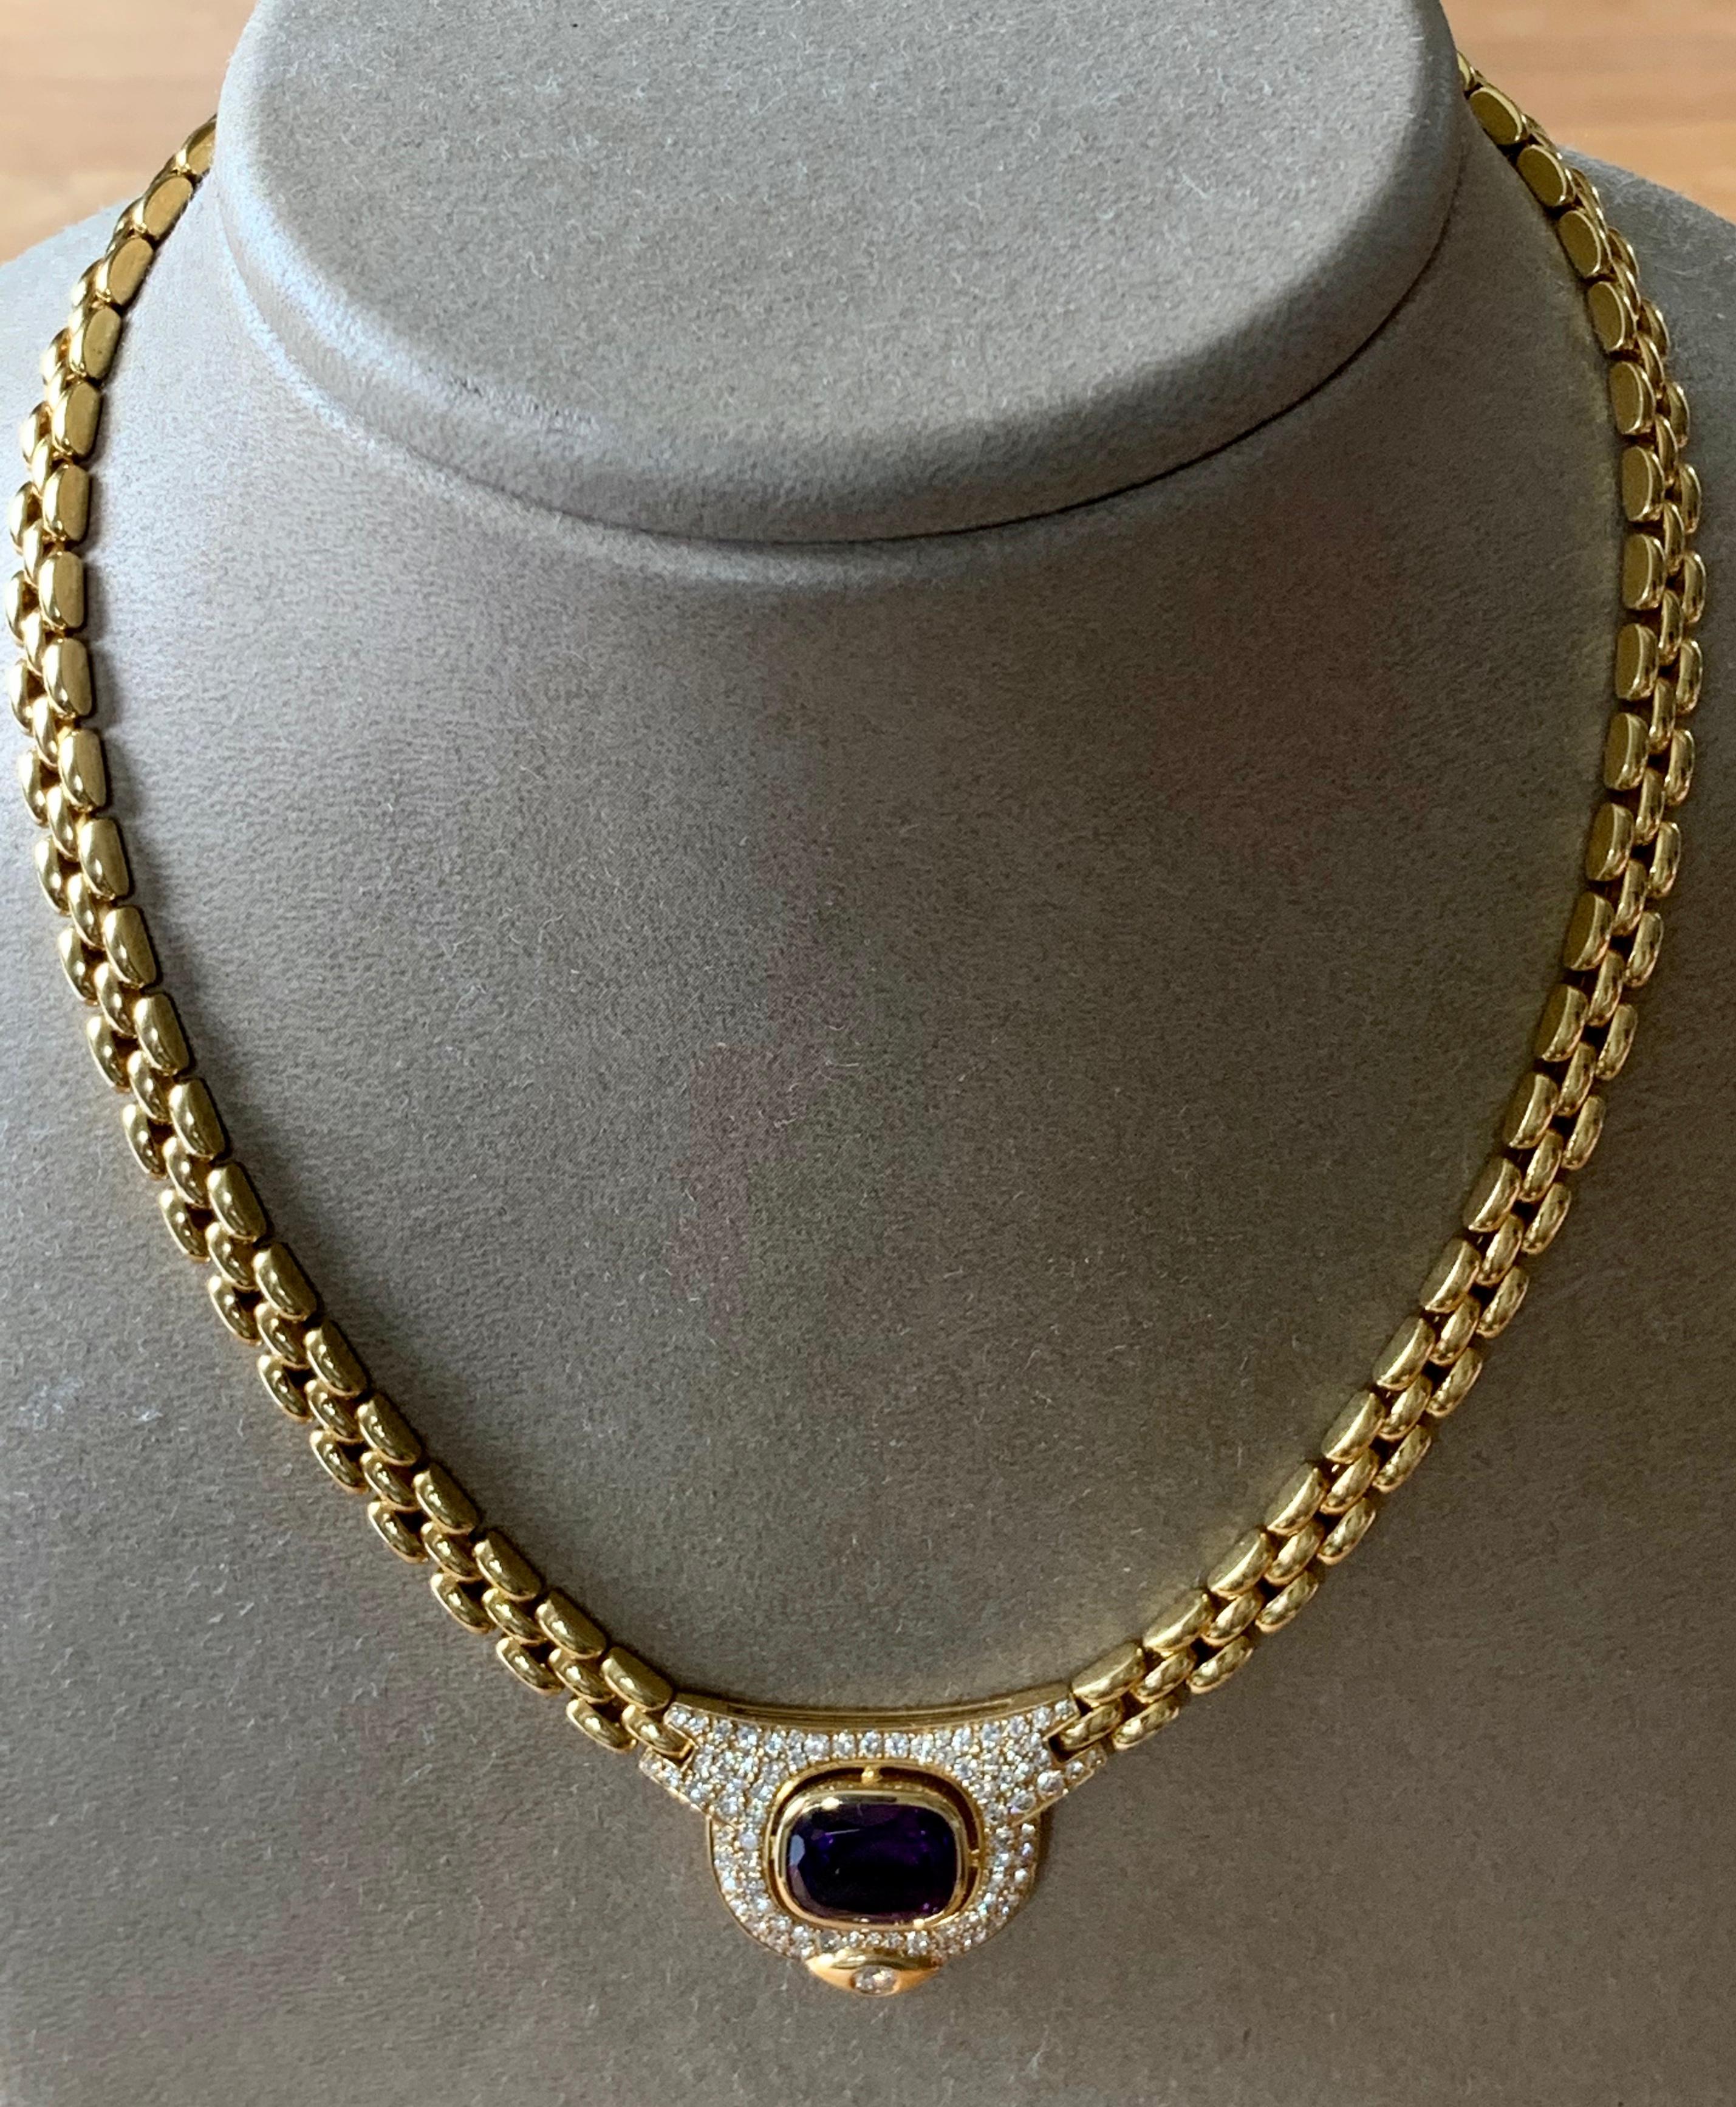 Contemporary Vintage 18 K Gold Link Chain Necklace with Amethyst and Diamonds by Kurz Zurich For Sale